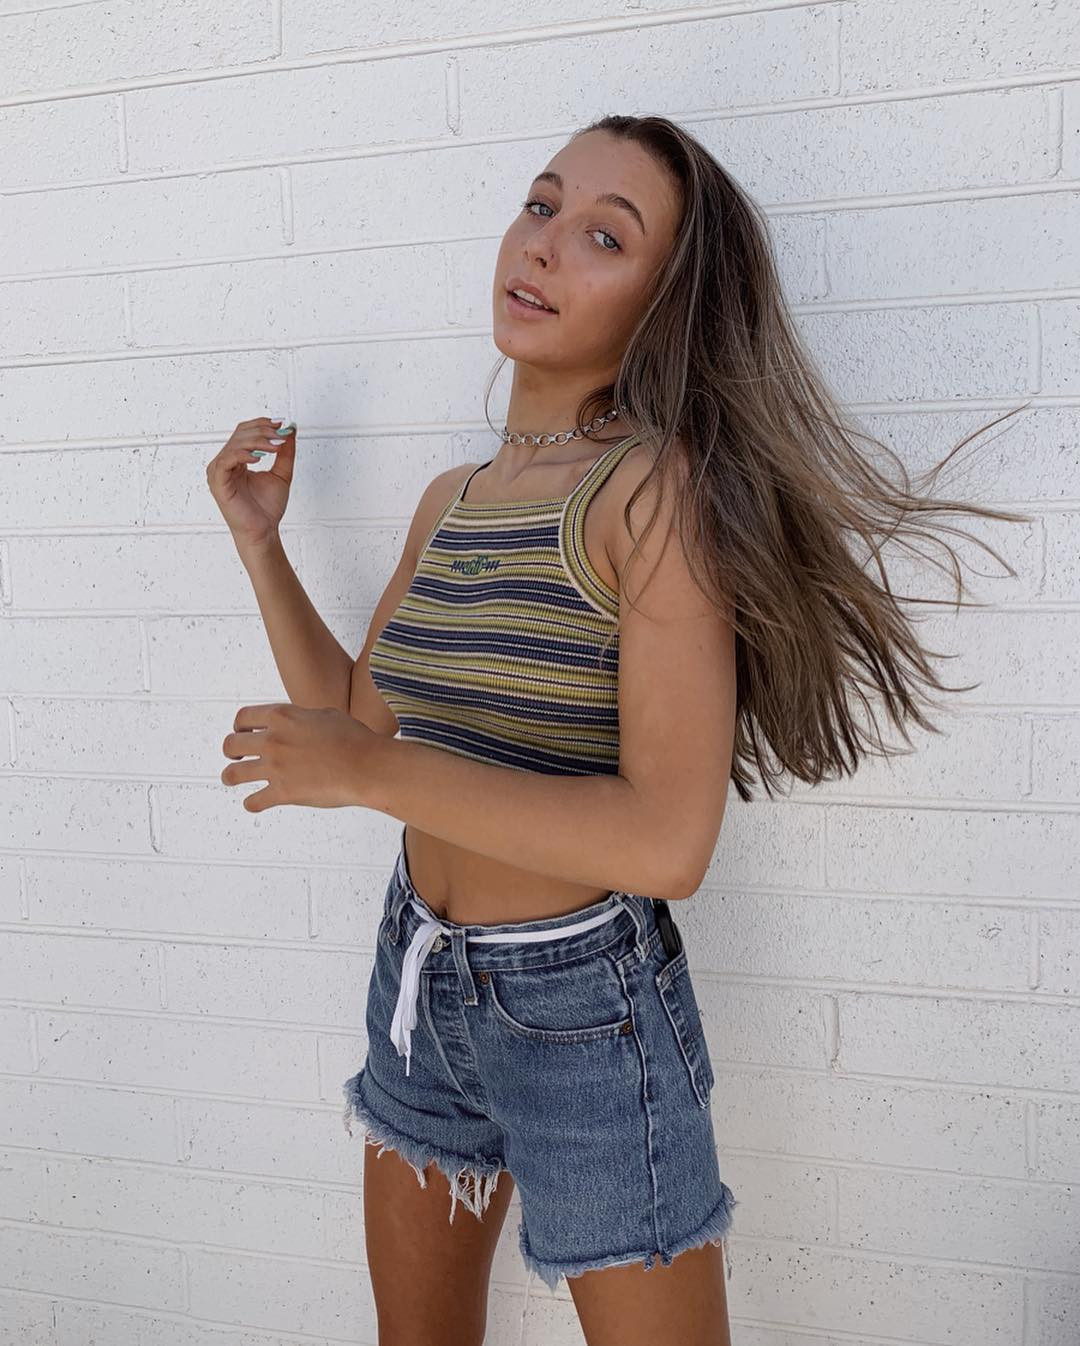 Emma Chamberlain's tips for outfit confidence